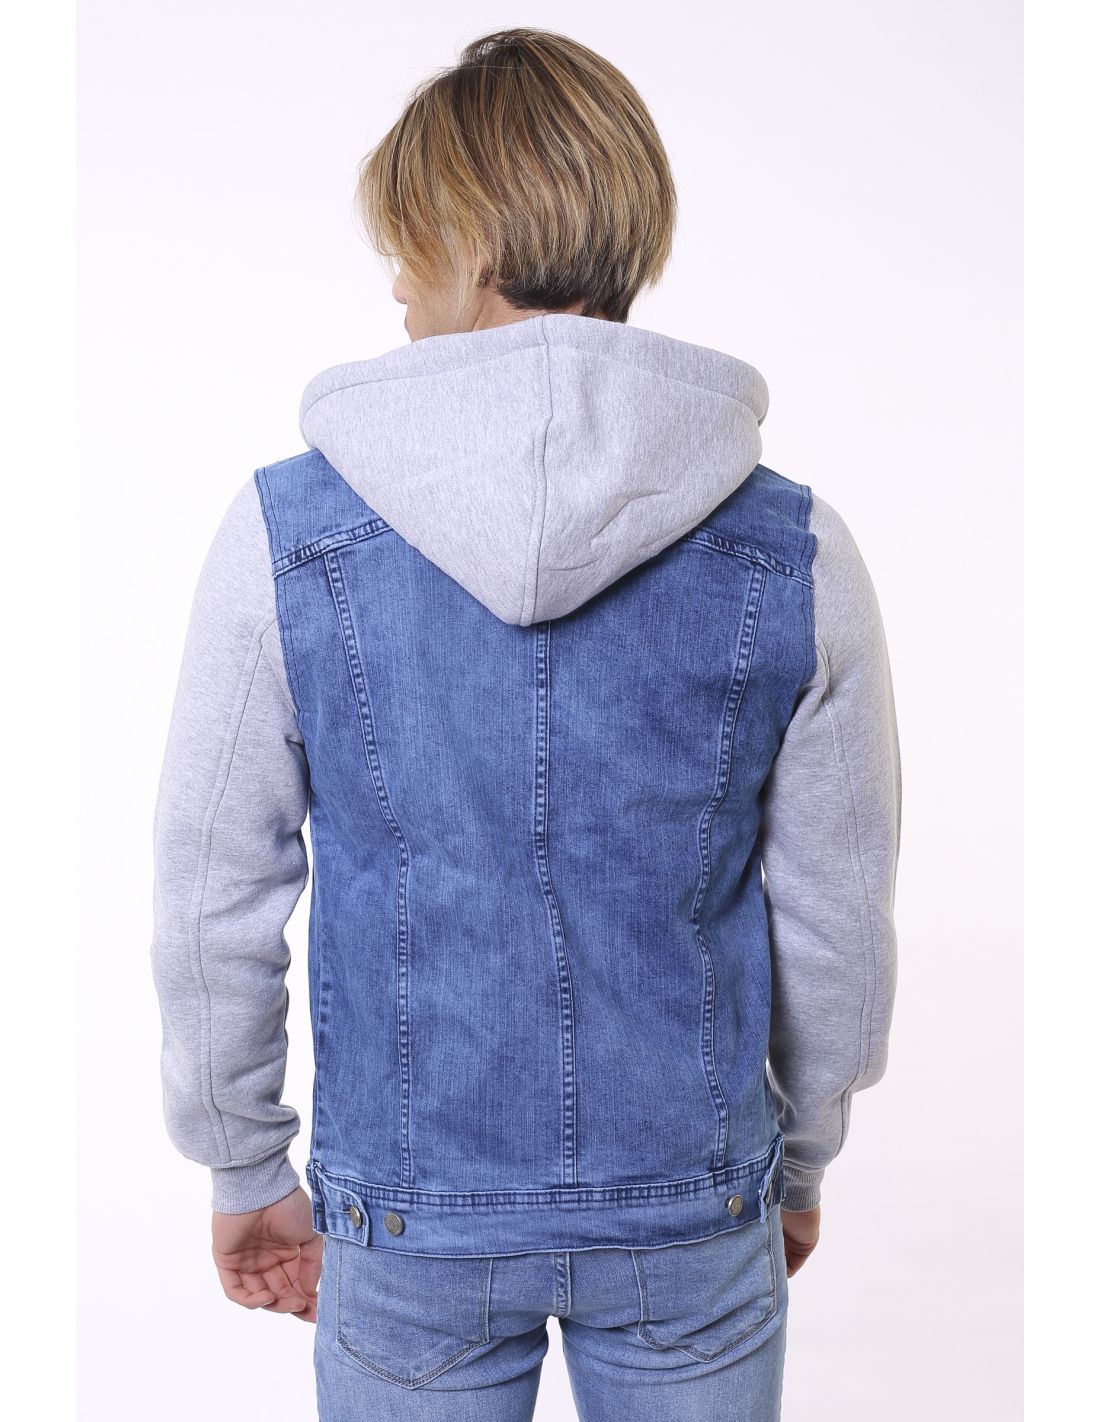 LE3NO Mens Casual Long Sleeve Denim Jean Jacket with Hoodie | Clothes,  Hoodie fashion, Mens fashion jeans